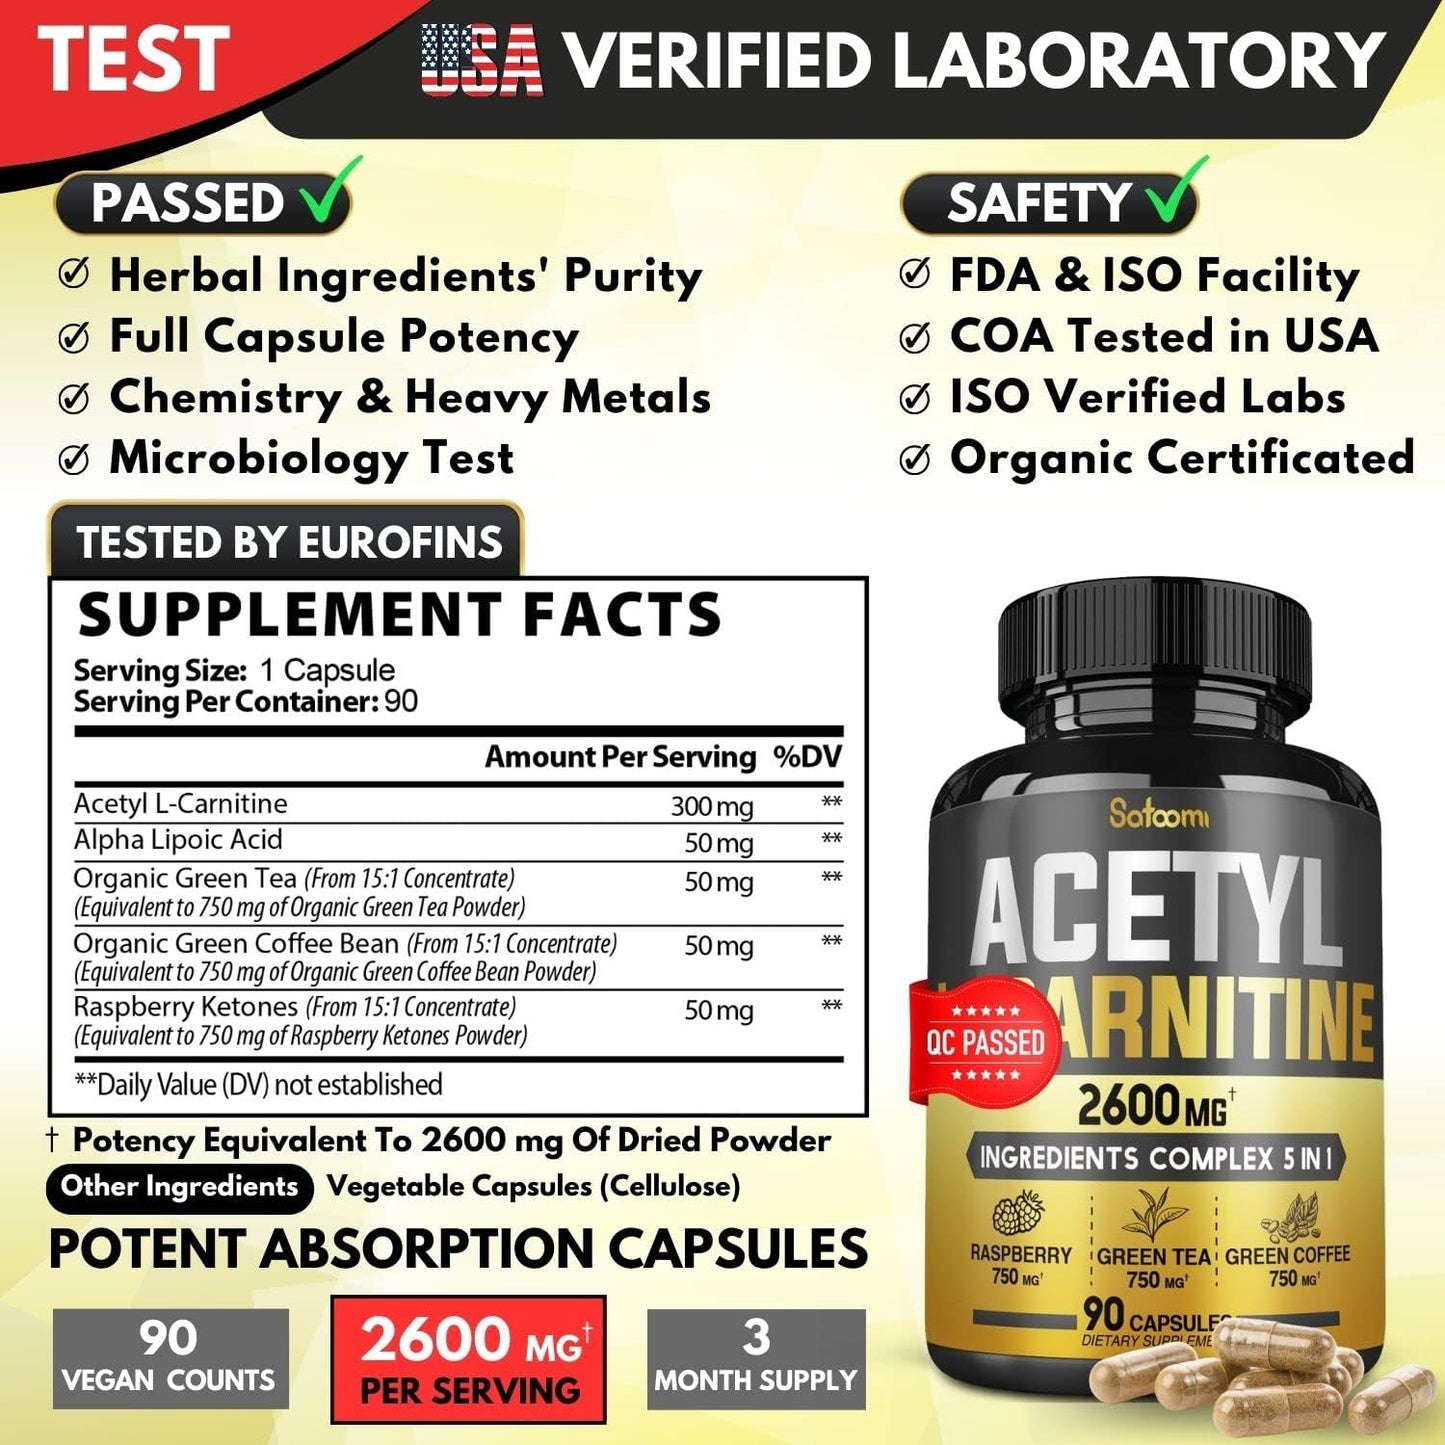 5In1 Acetyl L-Carnitine Complex Capsules - 2600Mg Daily - Combined Alpha Lipoic Acid, Green Tea, Green Coffee Bean & Raspberry Ketones - 90 Counts for 3 Months